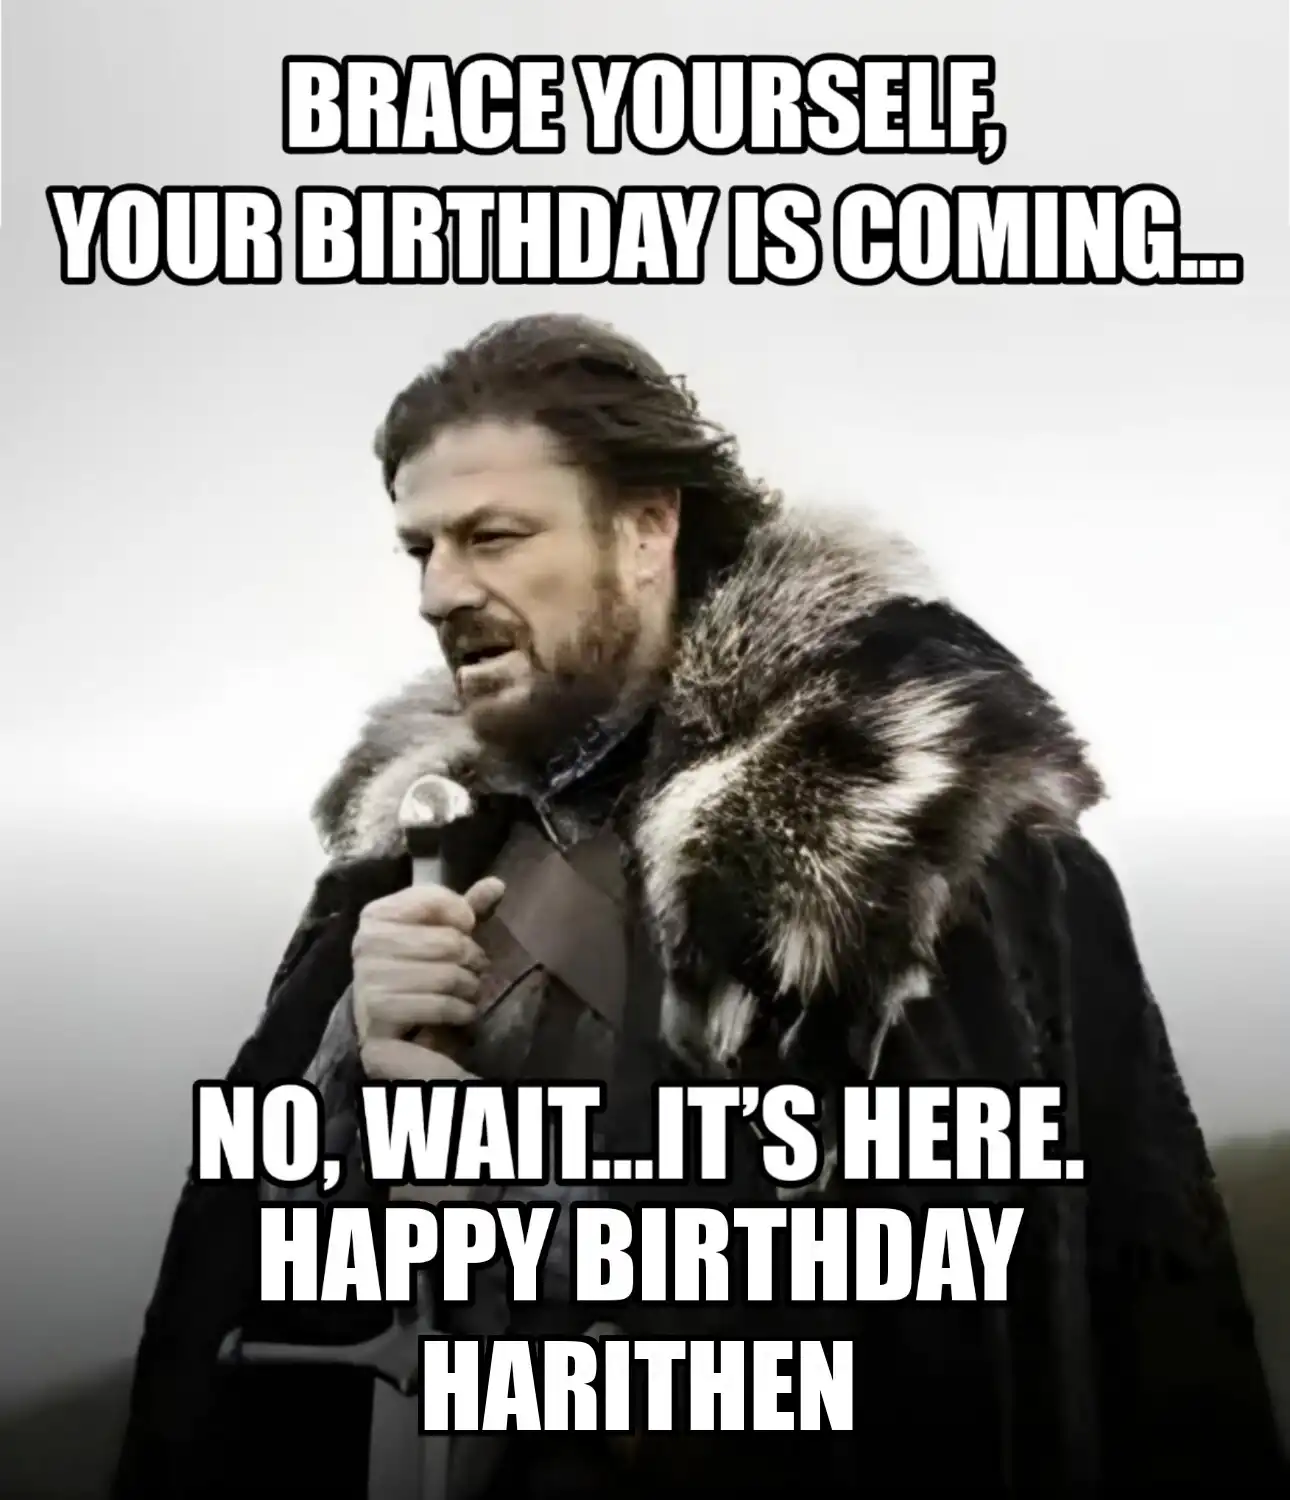 Happy Birthday Harithen Brace Yourself Your Birthday Is Coming Meme